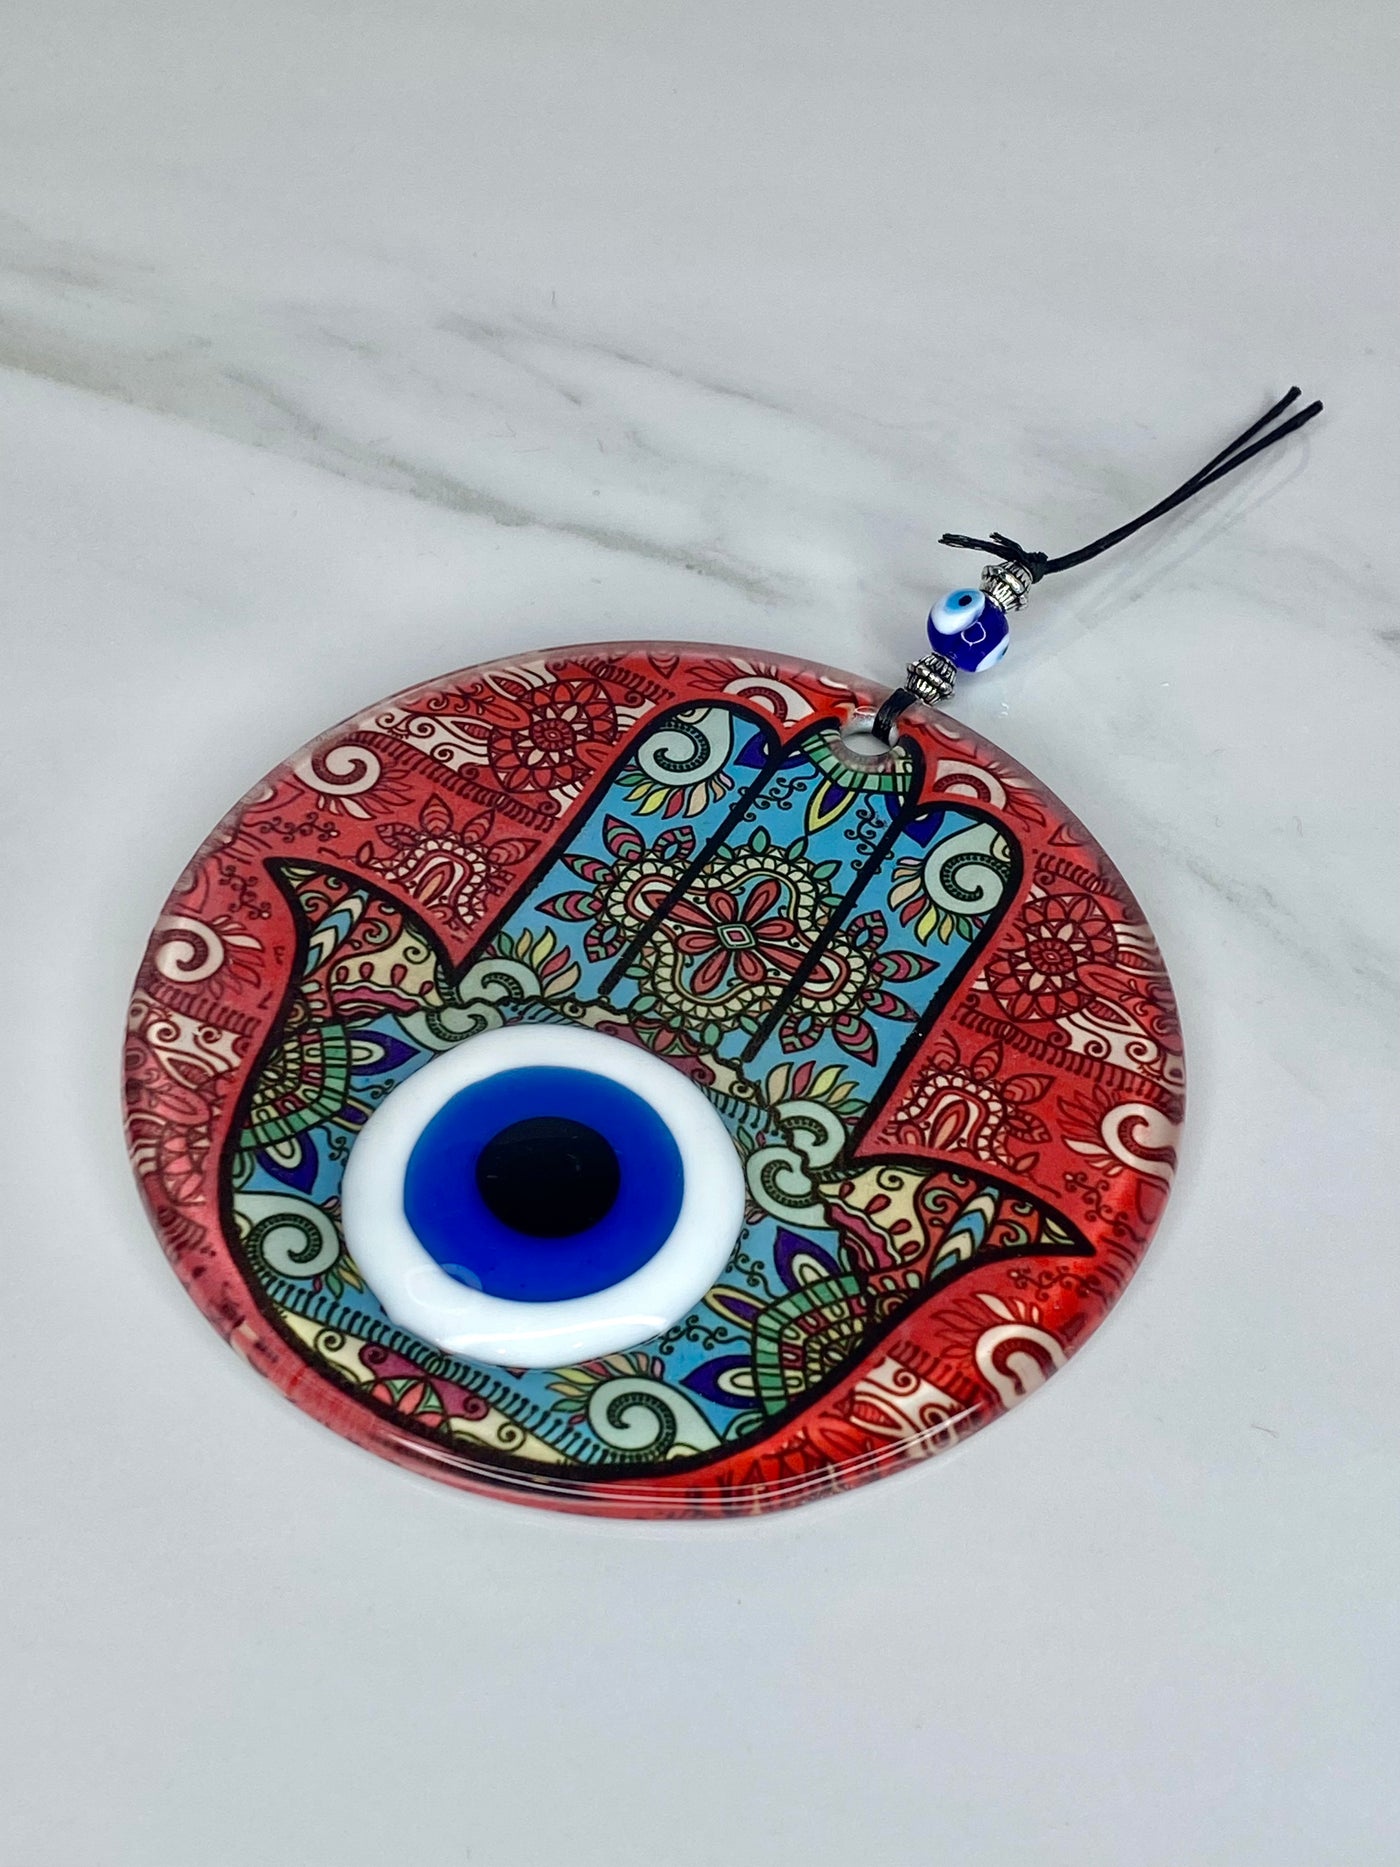 Blue Eye of Protection #5 red with blue hamsa hand